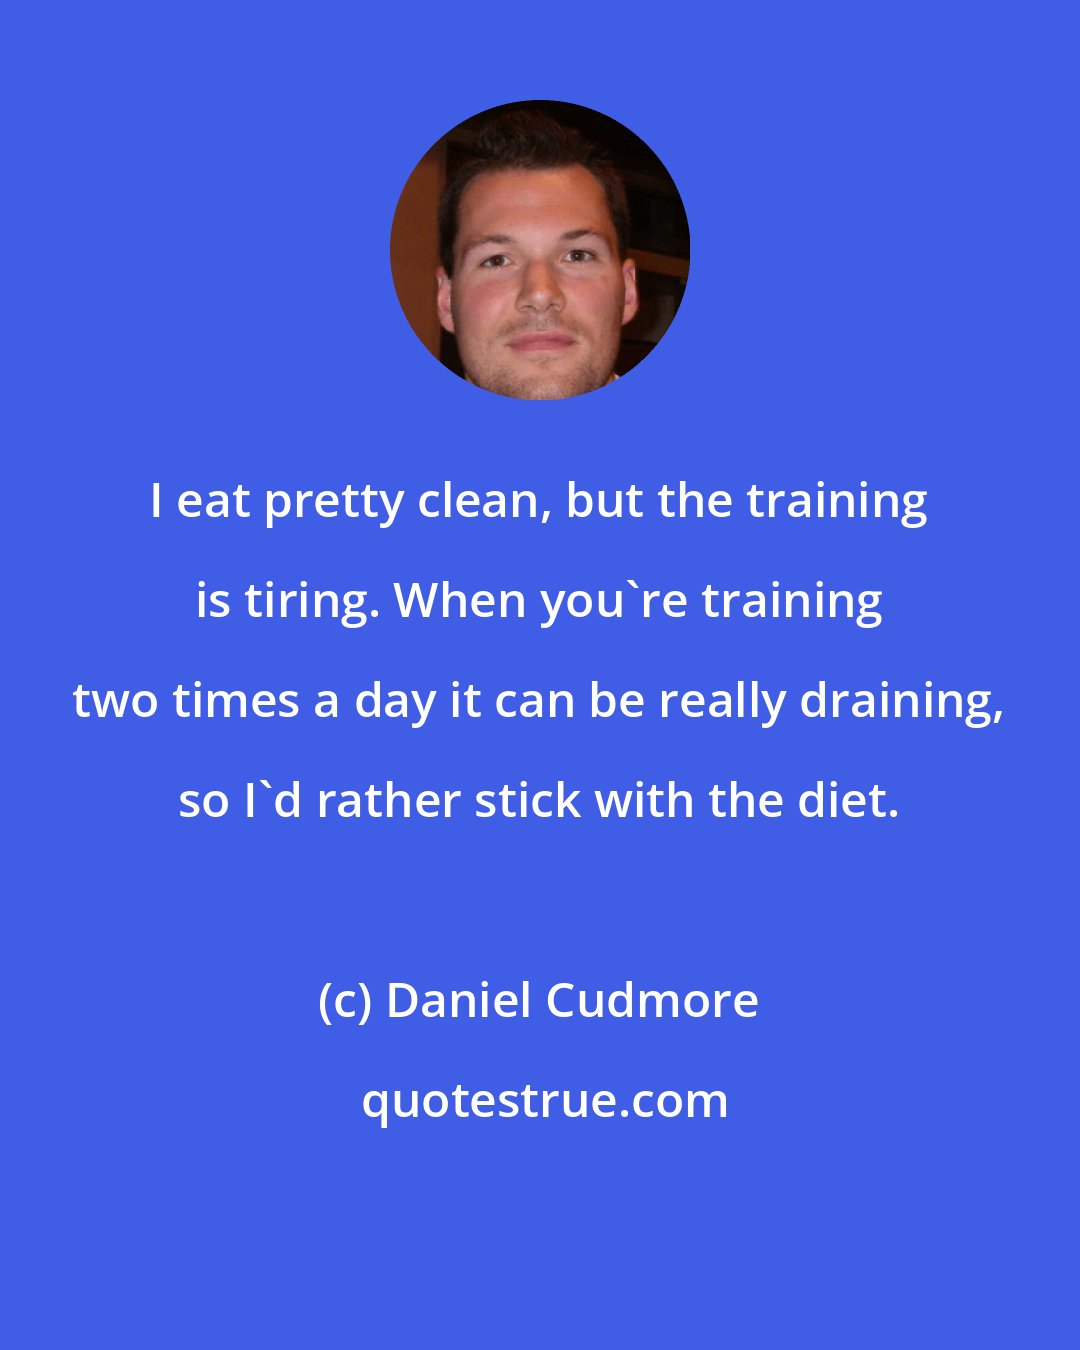 Daniel Cudmore: I eat pretty clean, but the training is tiring. When you're training two times a day it can be really draining, so I'd rather stick with the diet.